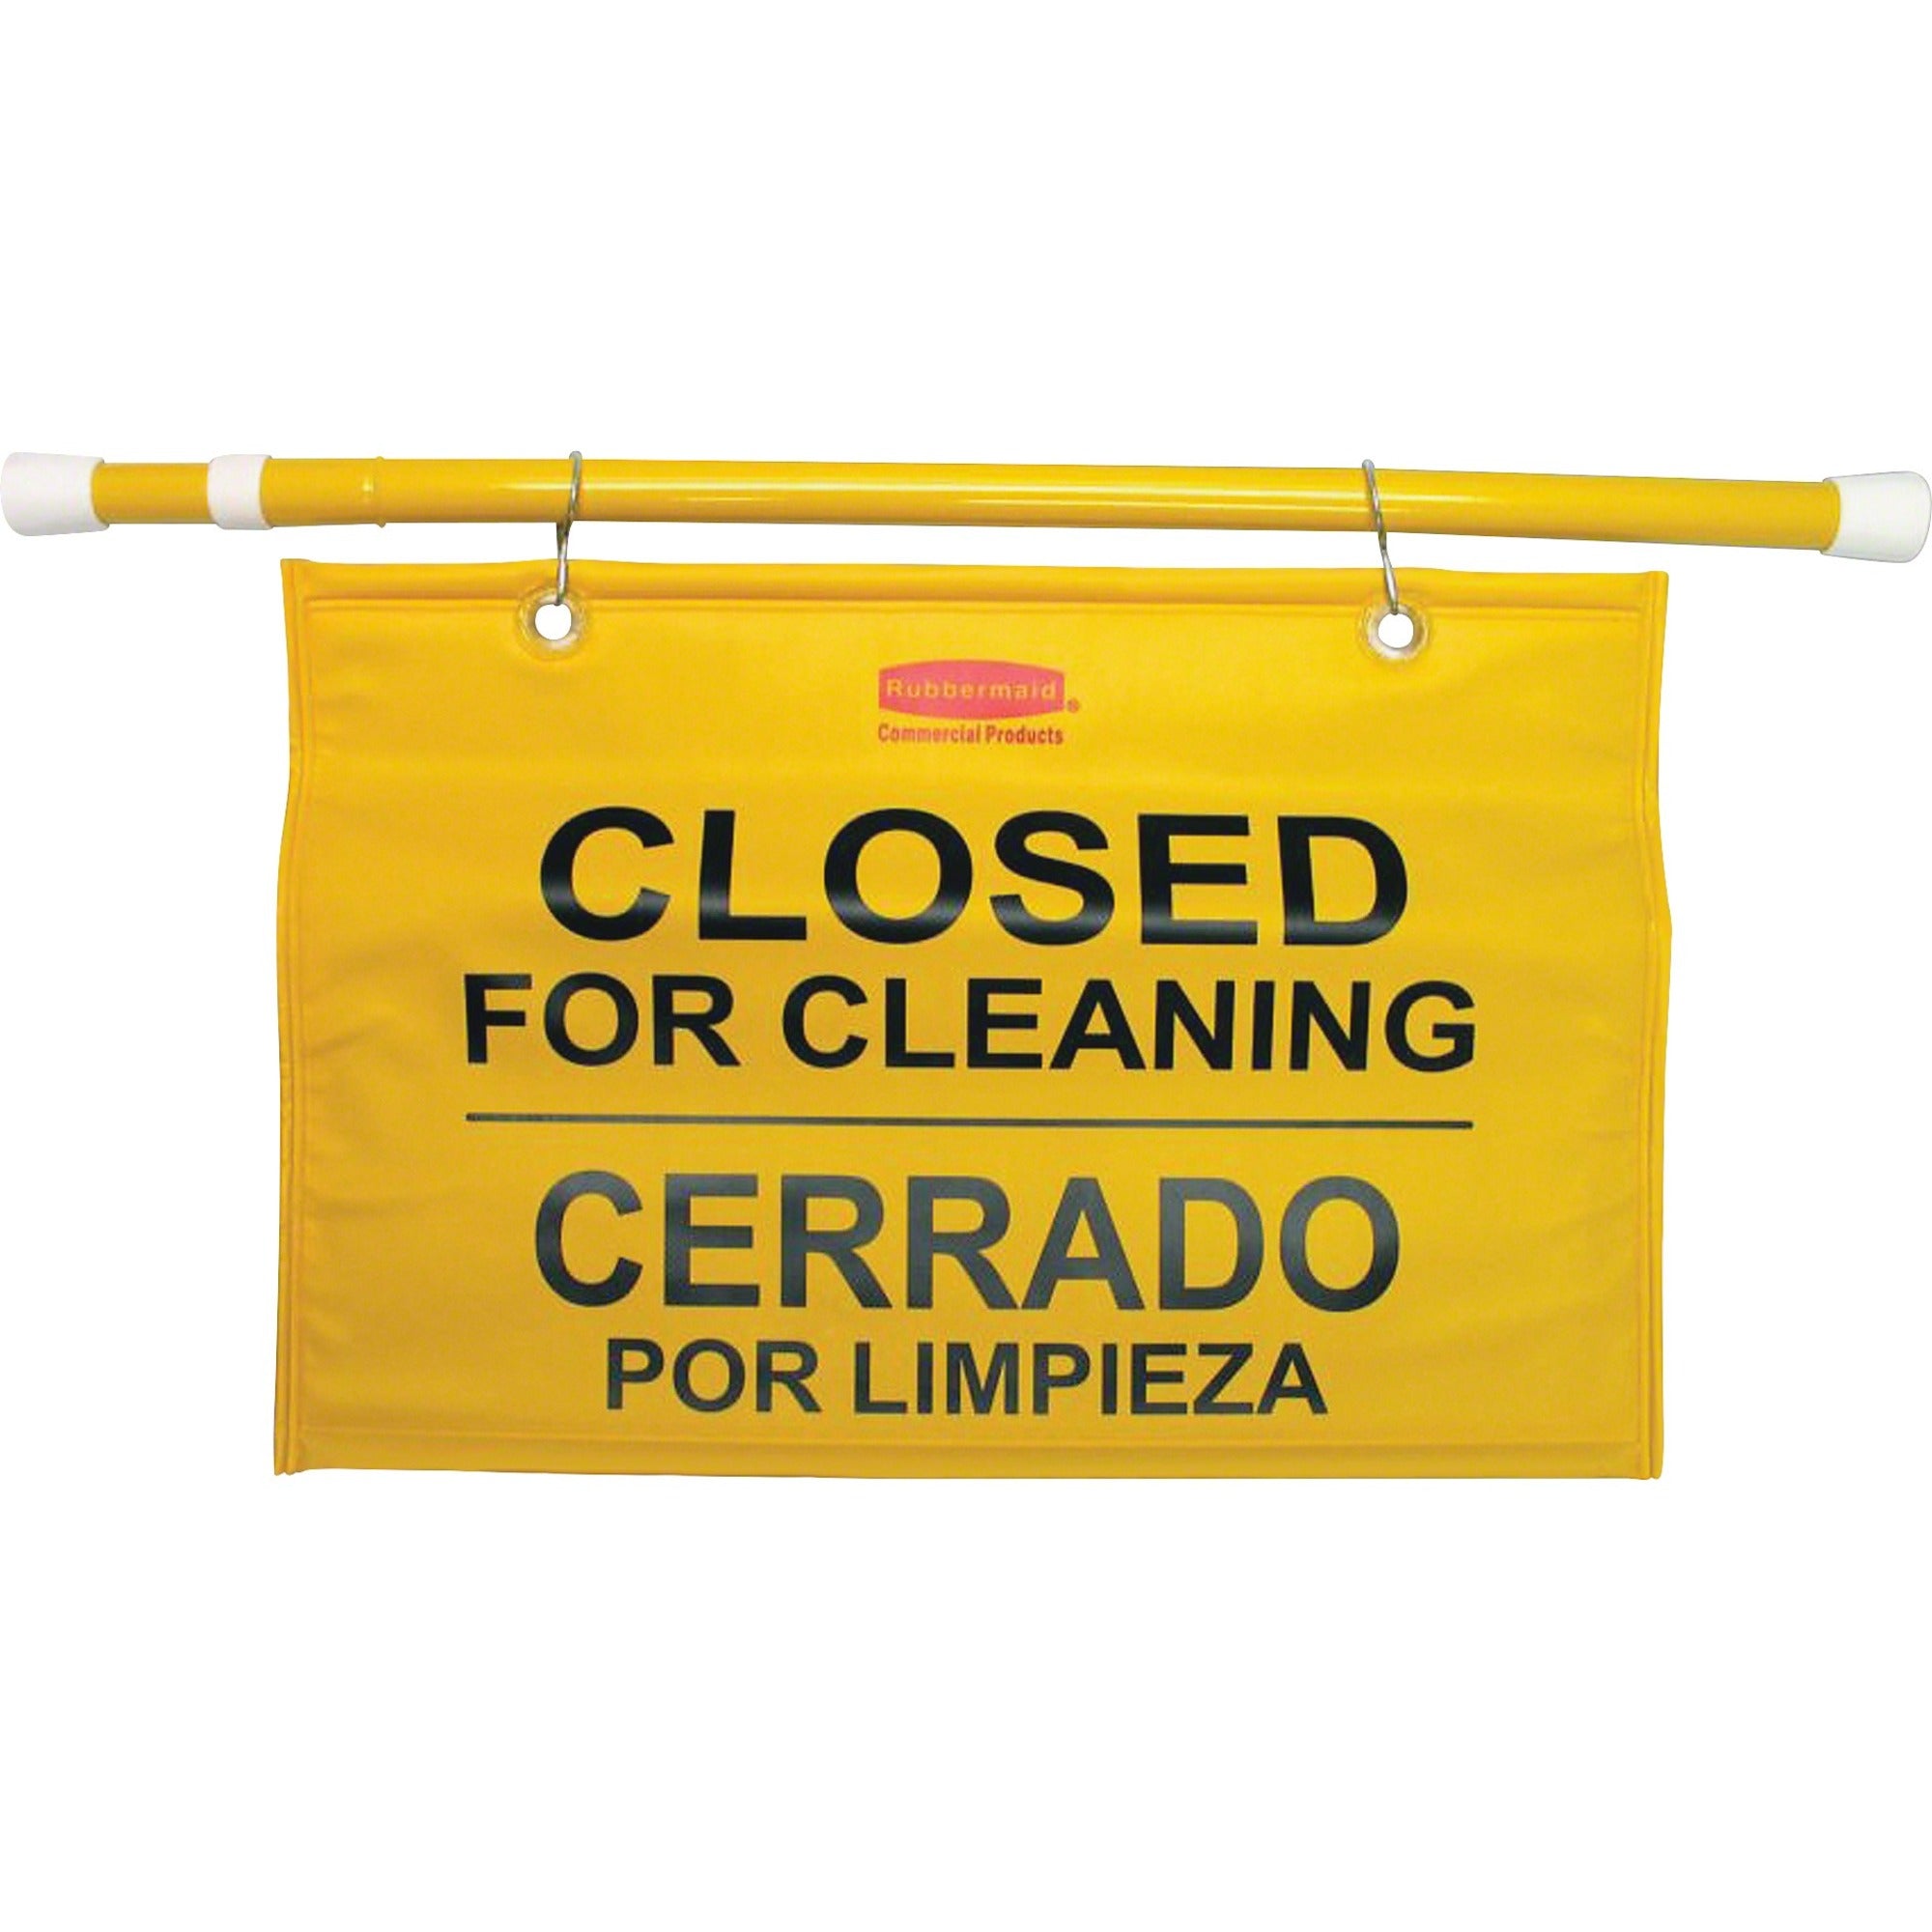 rubbermaid-commercial-multilingual-closed-for-cleaning-safety-signs-6-carton-english-french-spanish-closed-for-cleaning-print-message-50-width-x-13-height-x-1-depth-durable-yellow_rcp9s1600ylct - 1